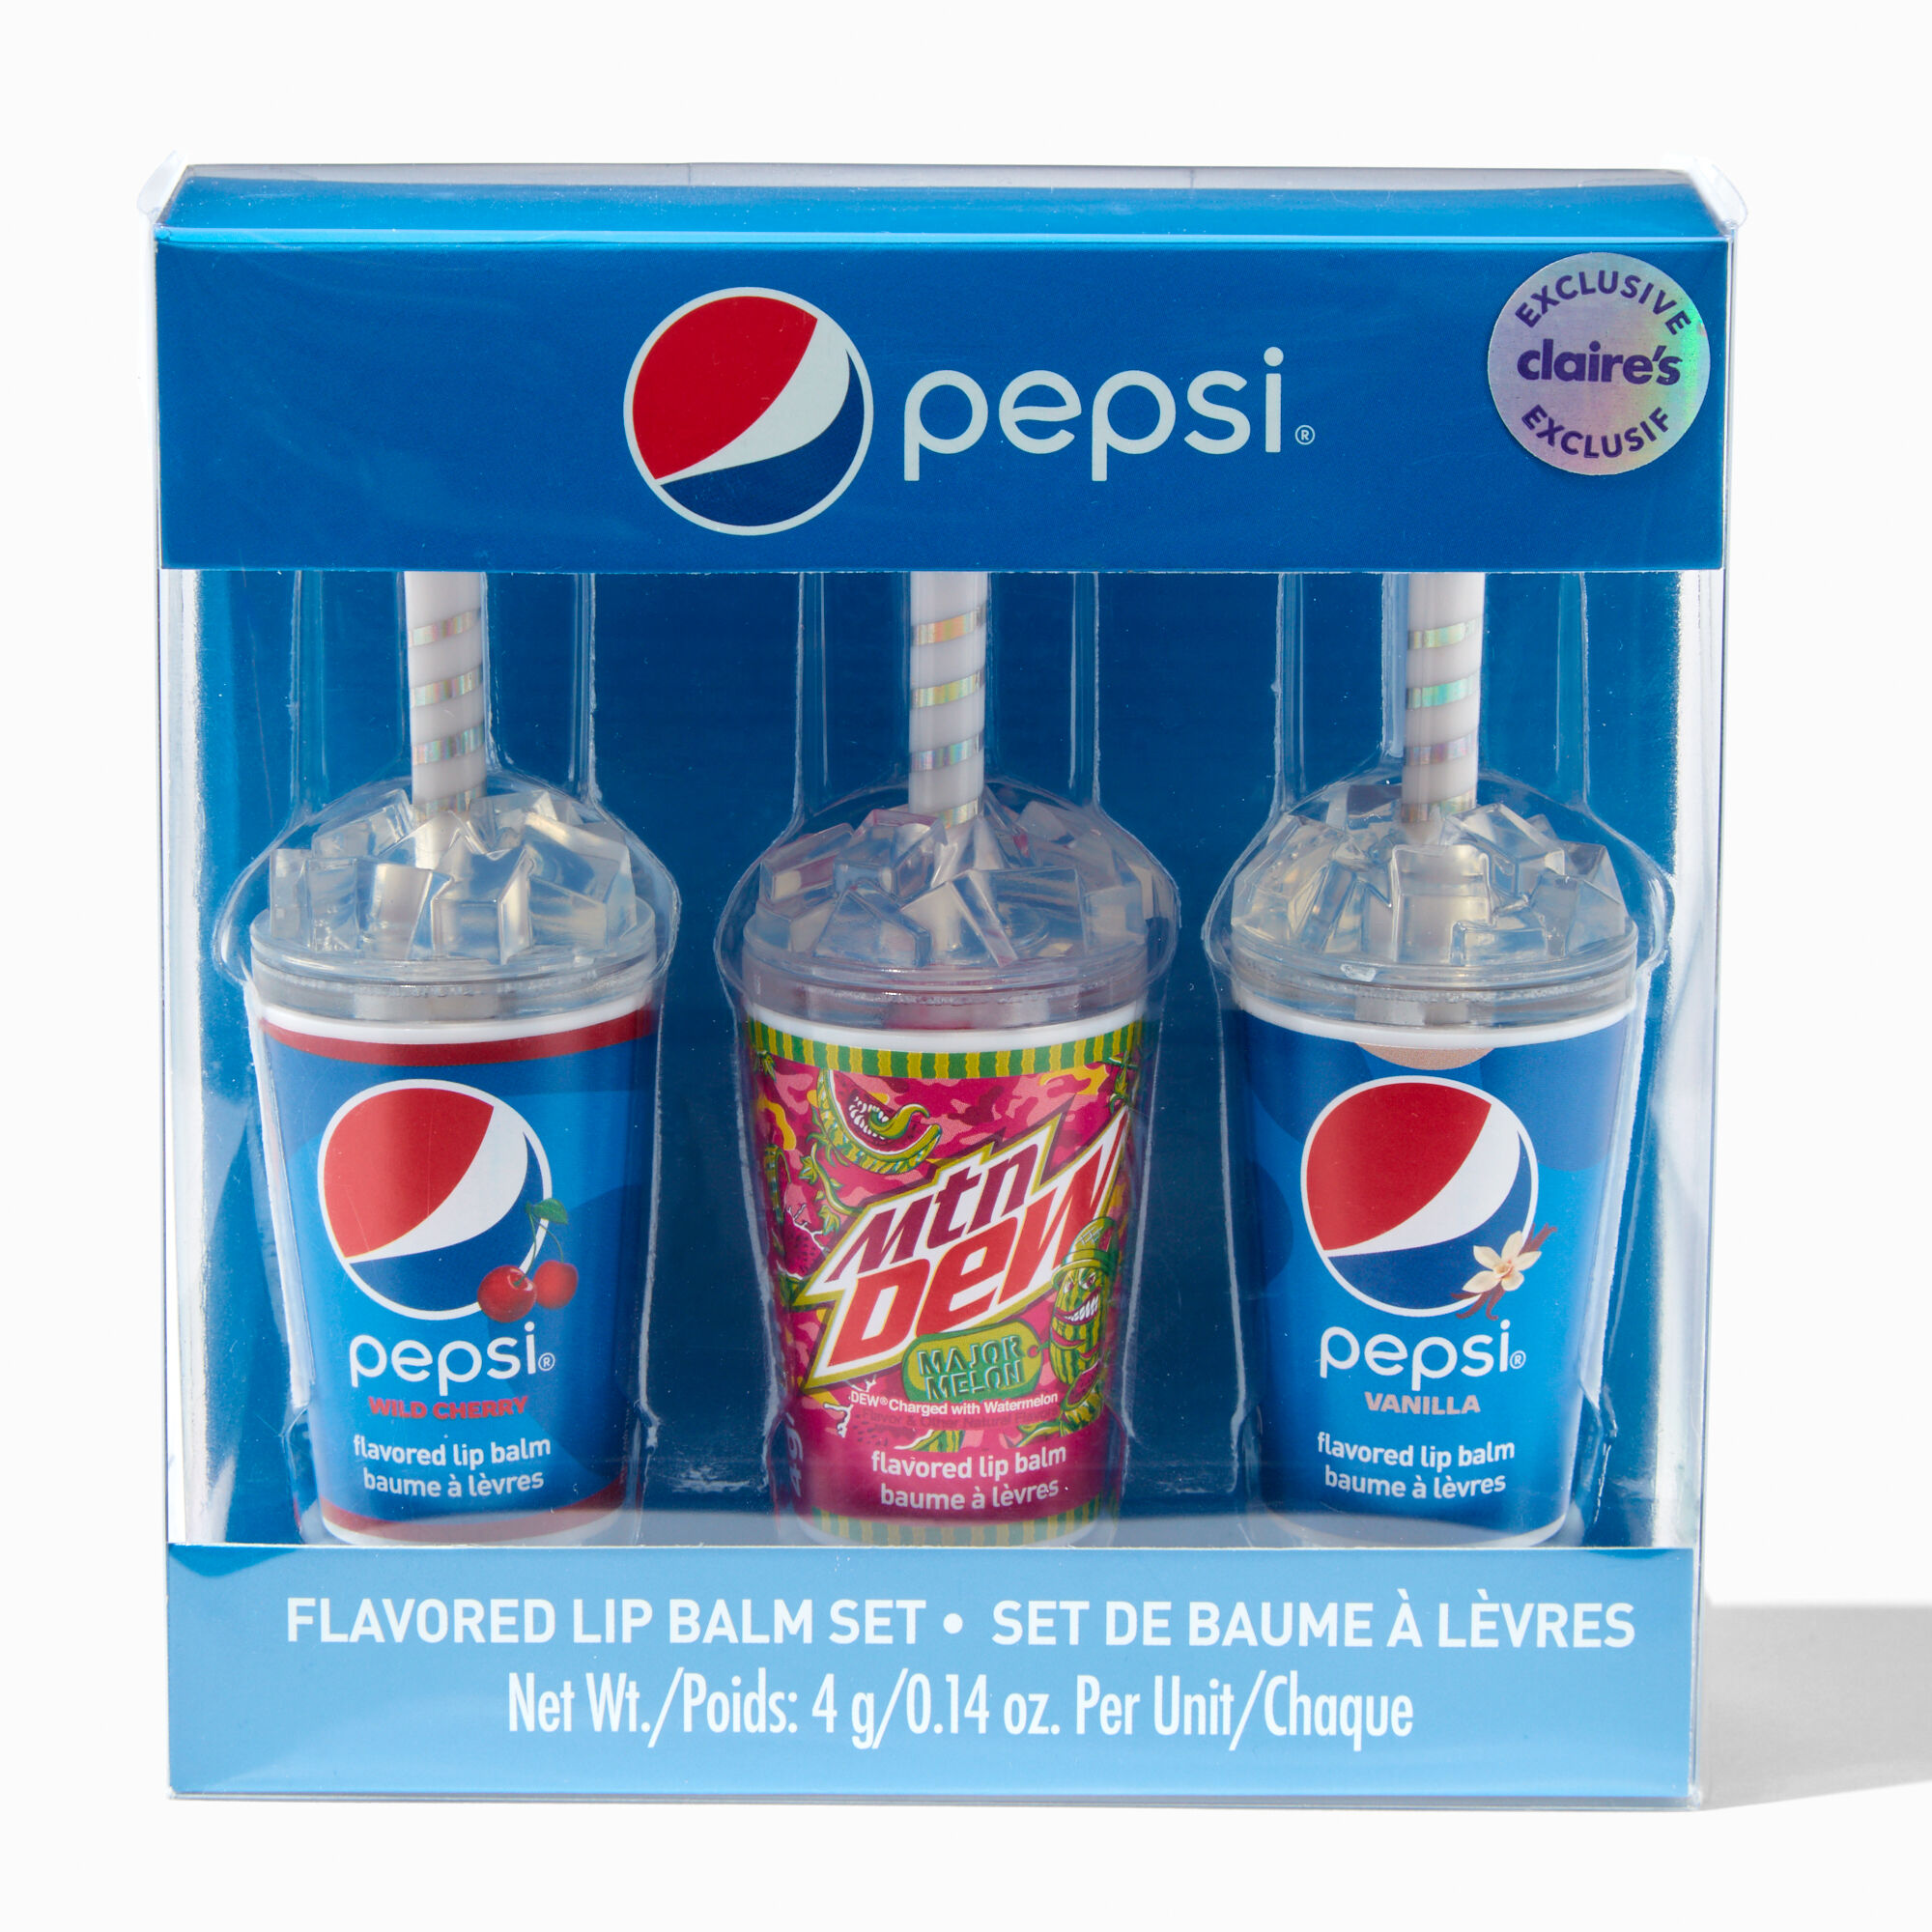 View Pepsi Claires Exclusive Flavored Lip Balm Set 3 Pack information